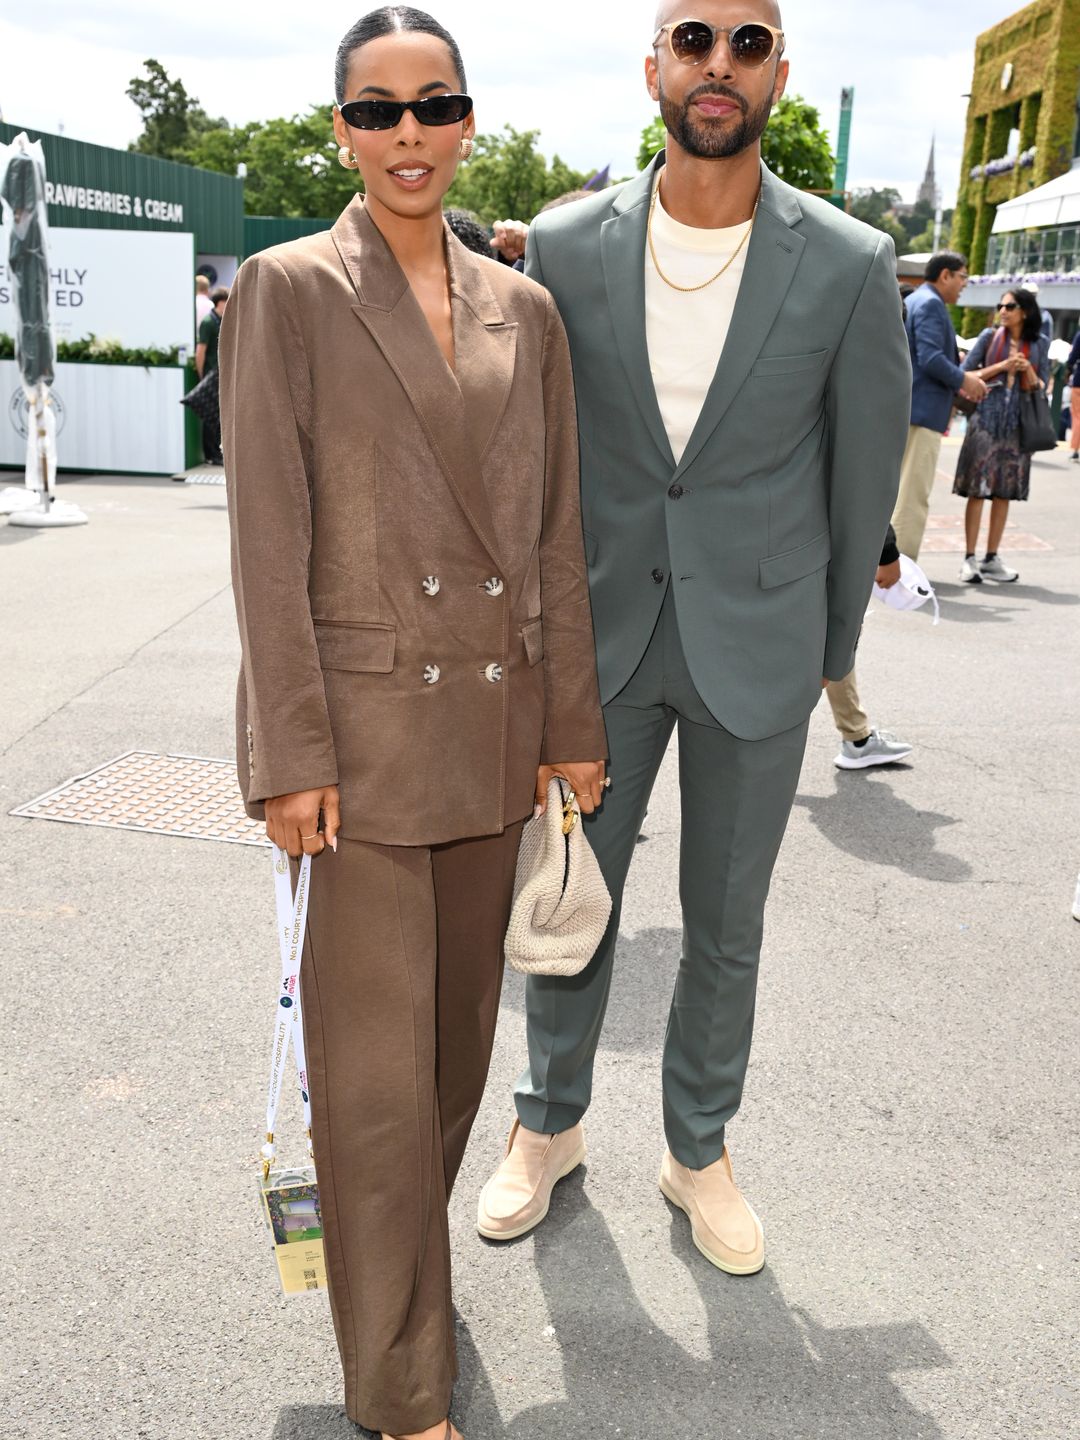 ochelle Humes and Marvin Humes attend day one of the Wimbledon Tennis Championships 